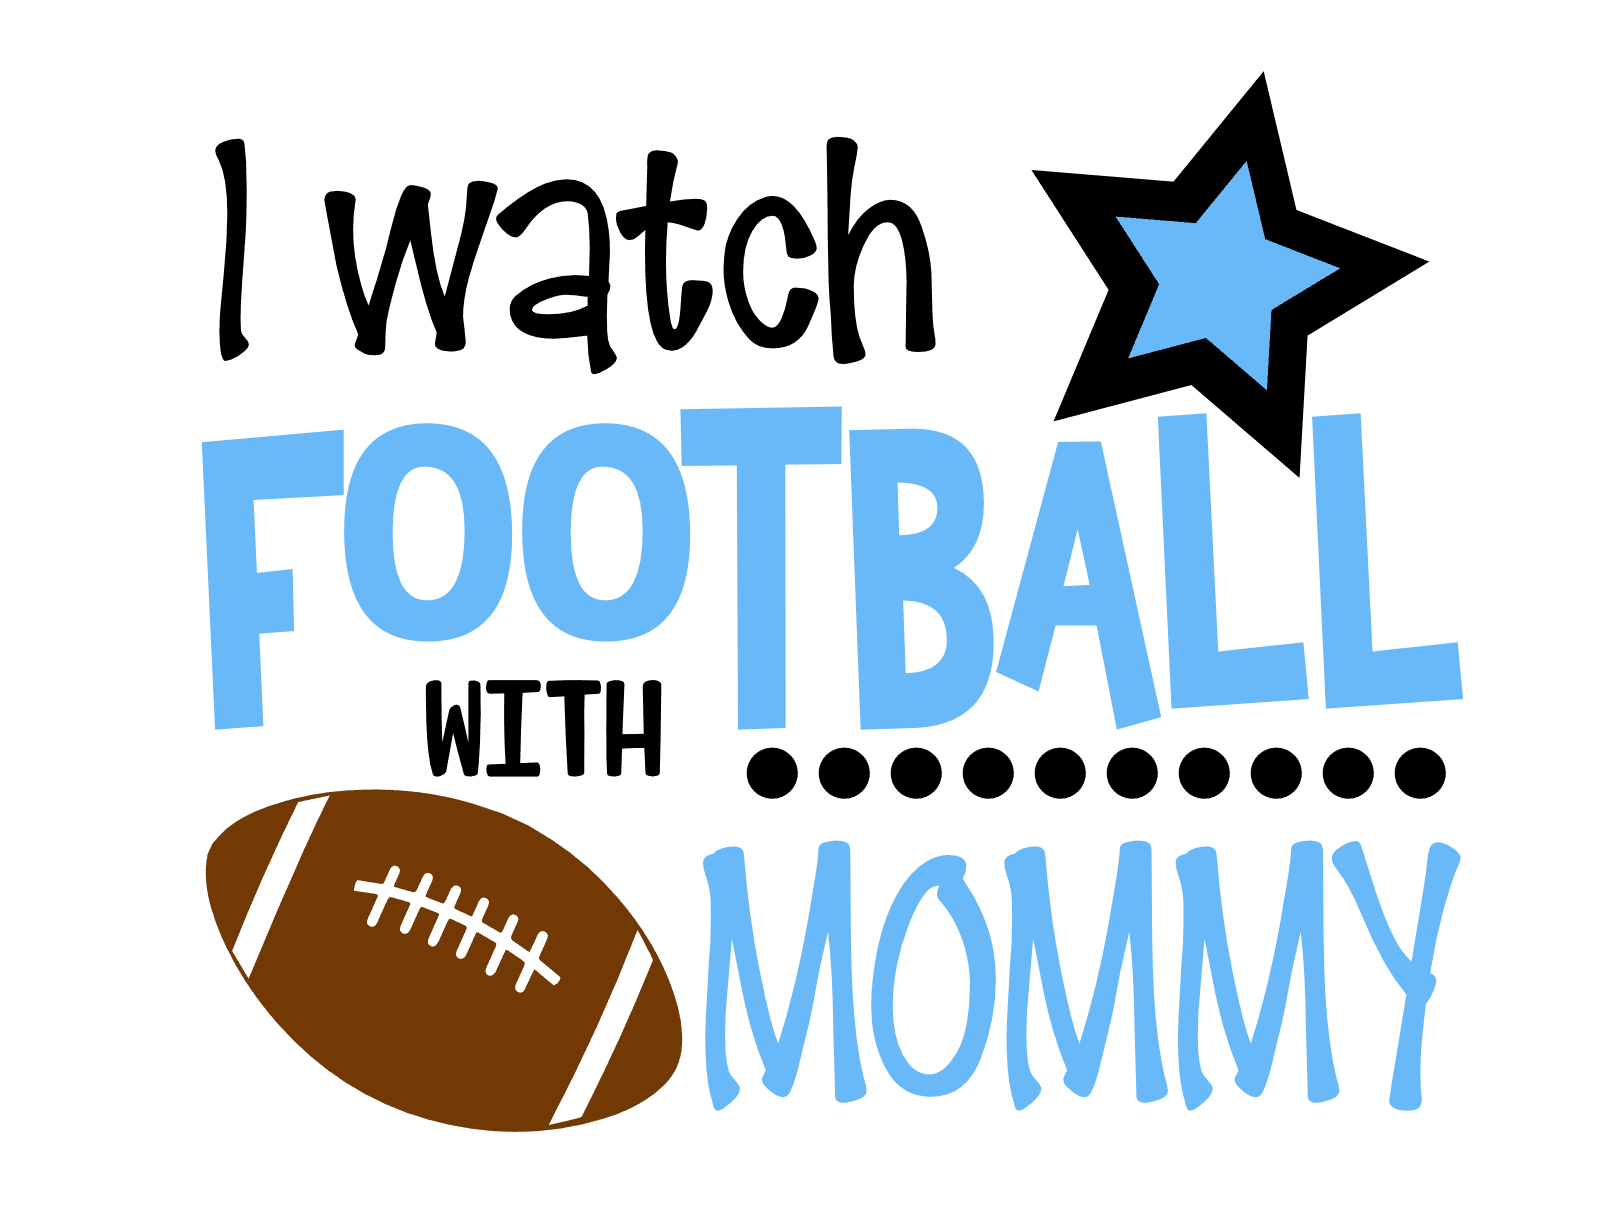 i-watch-football-with-mommy-mom-life-sport-free-svg-file-SvgHeart.Com